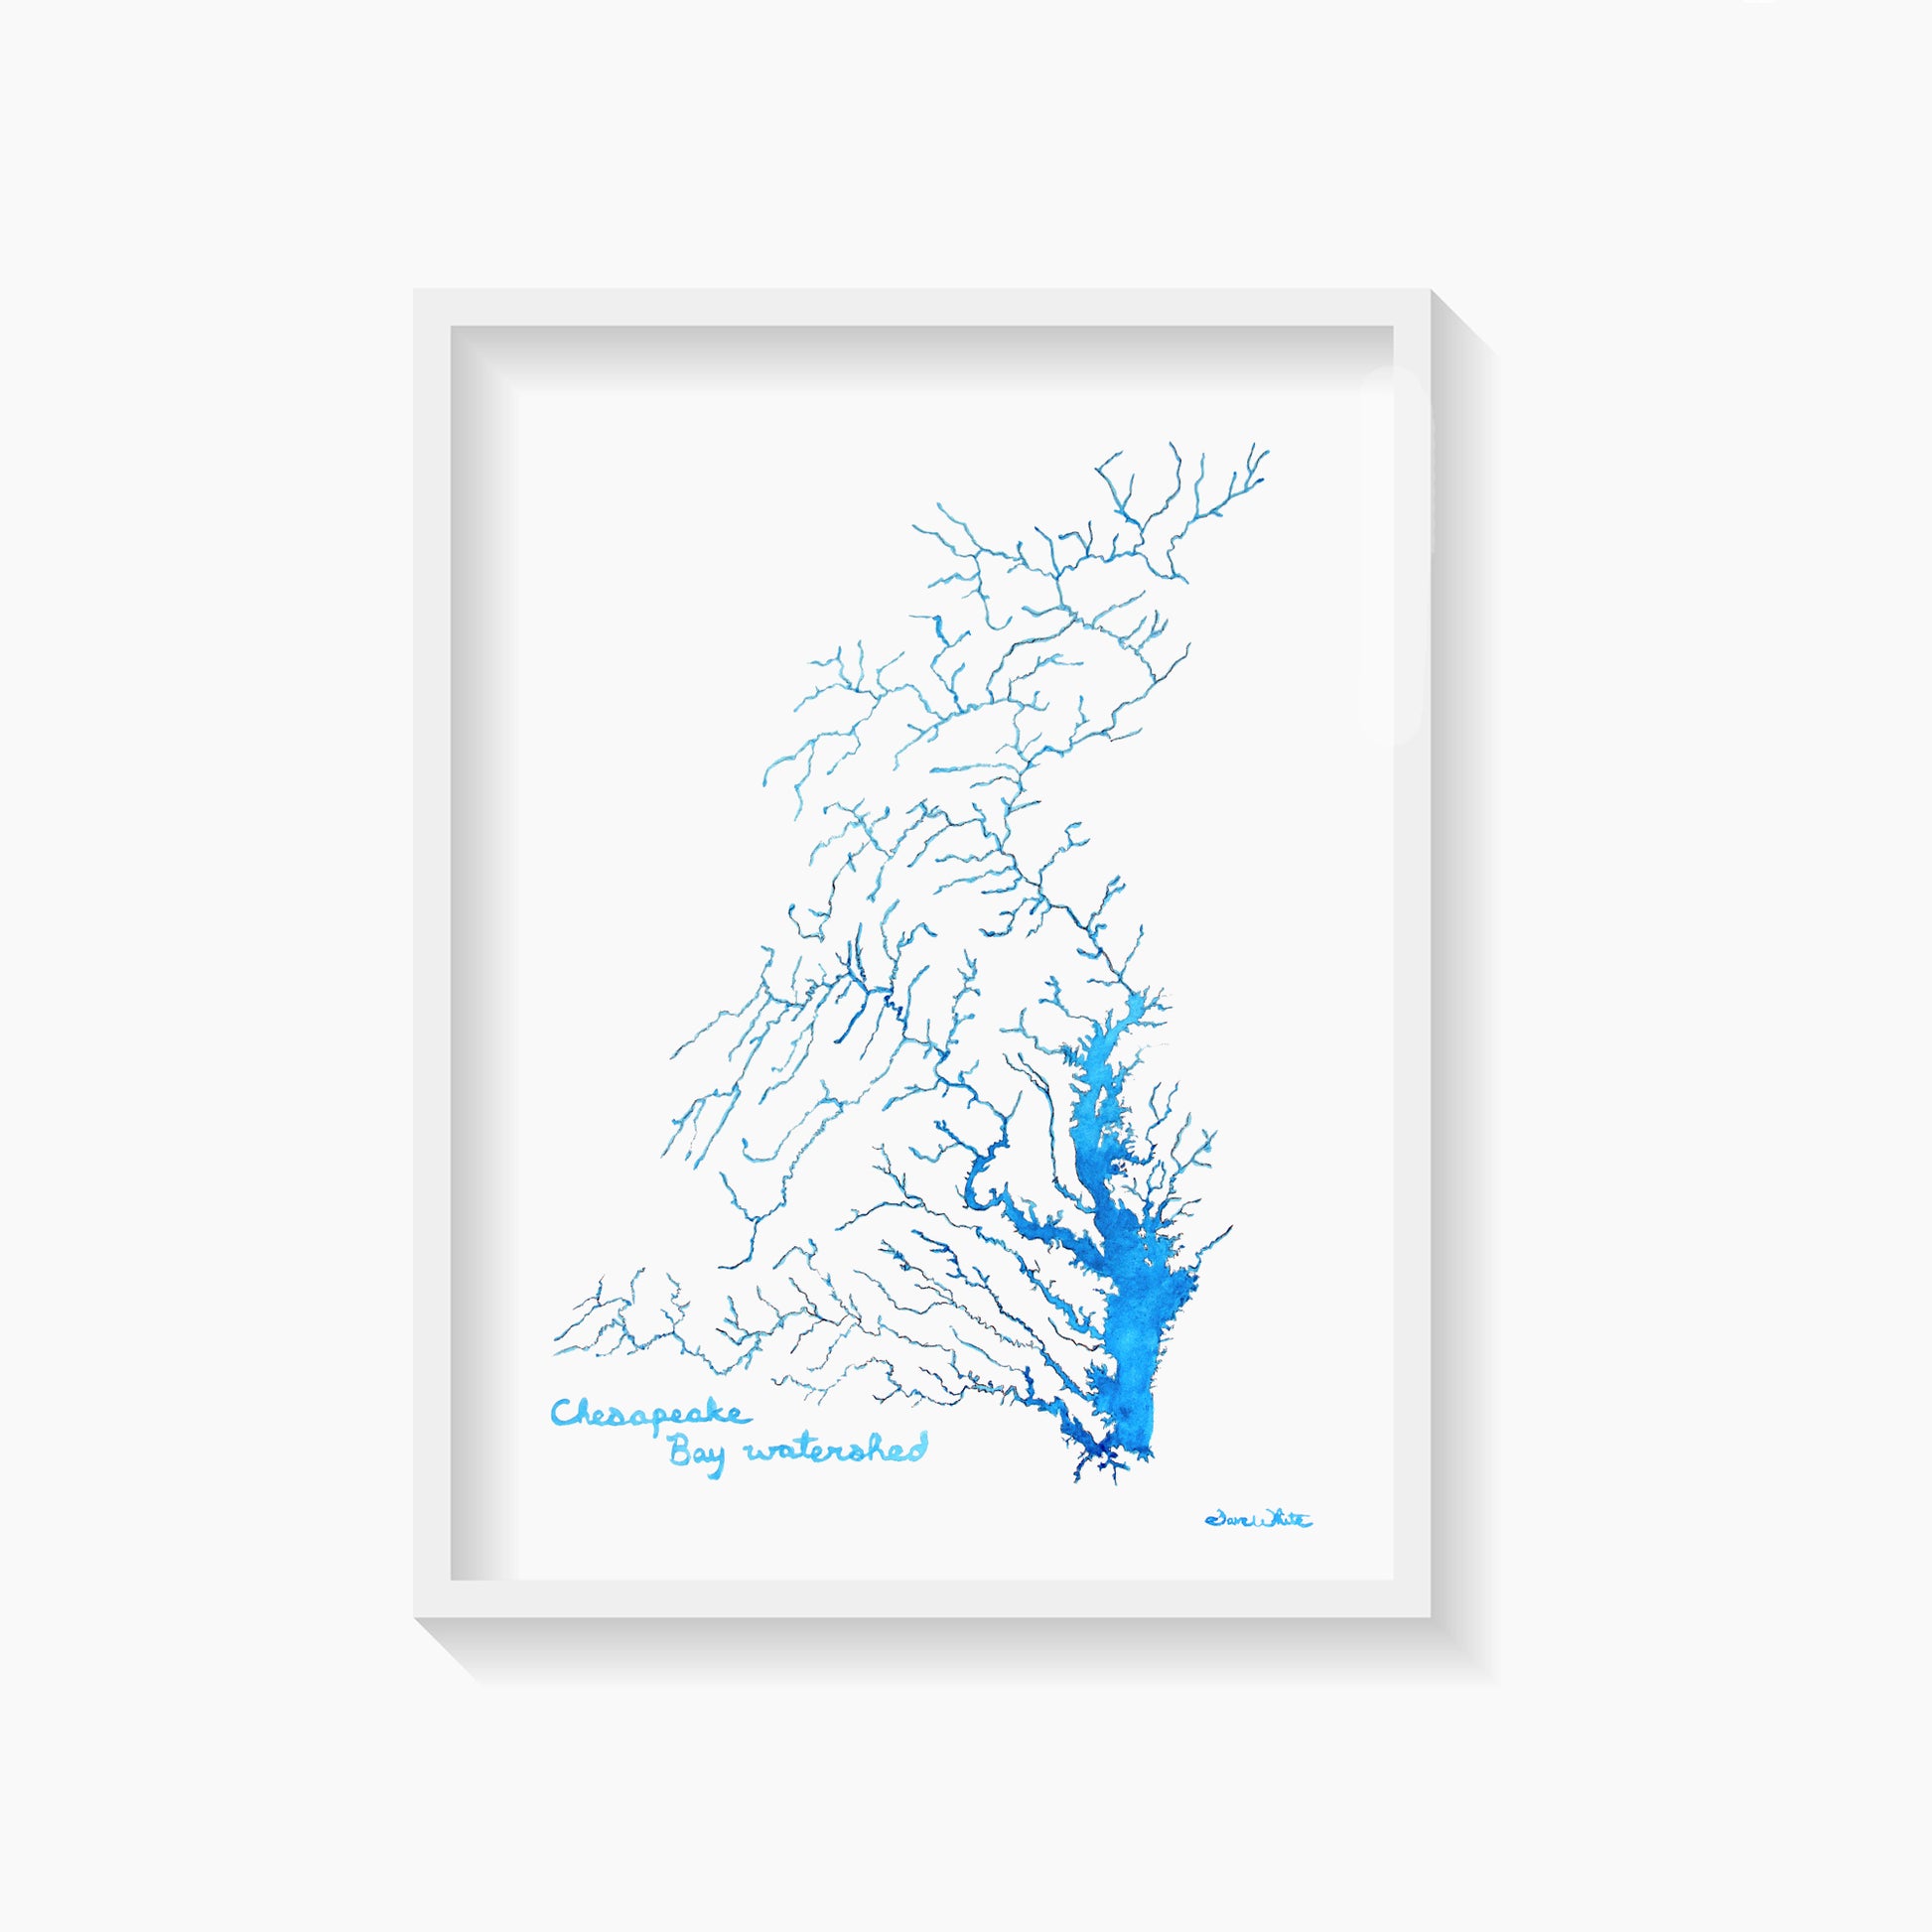 Chesapeake Bay Watershed watercolor painting art print by Artist Dave White